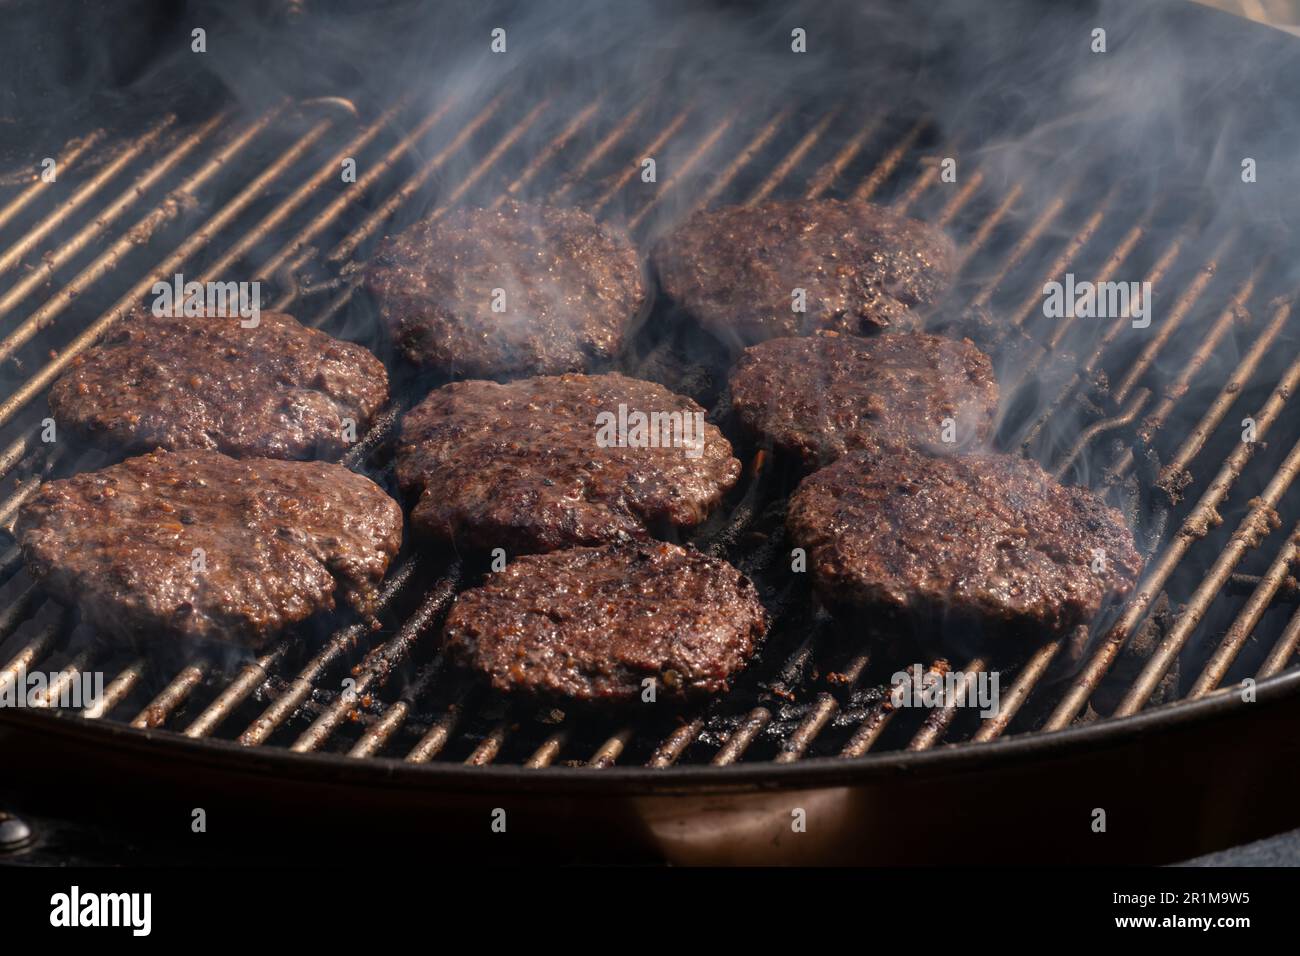 Grilling burgers on barbecue BBQ grill on hot charcoal. Homemade burger patties are being roasted on grill bars. Stock Photo